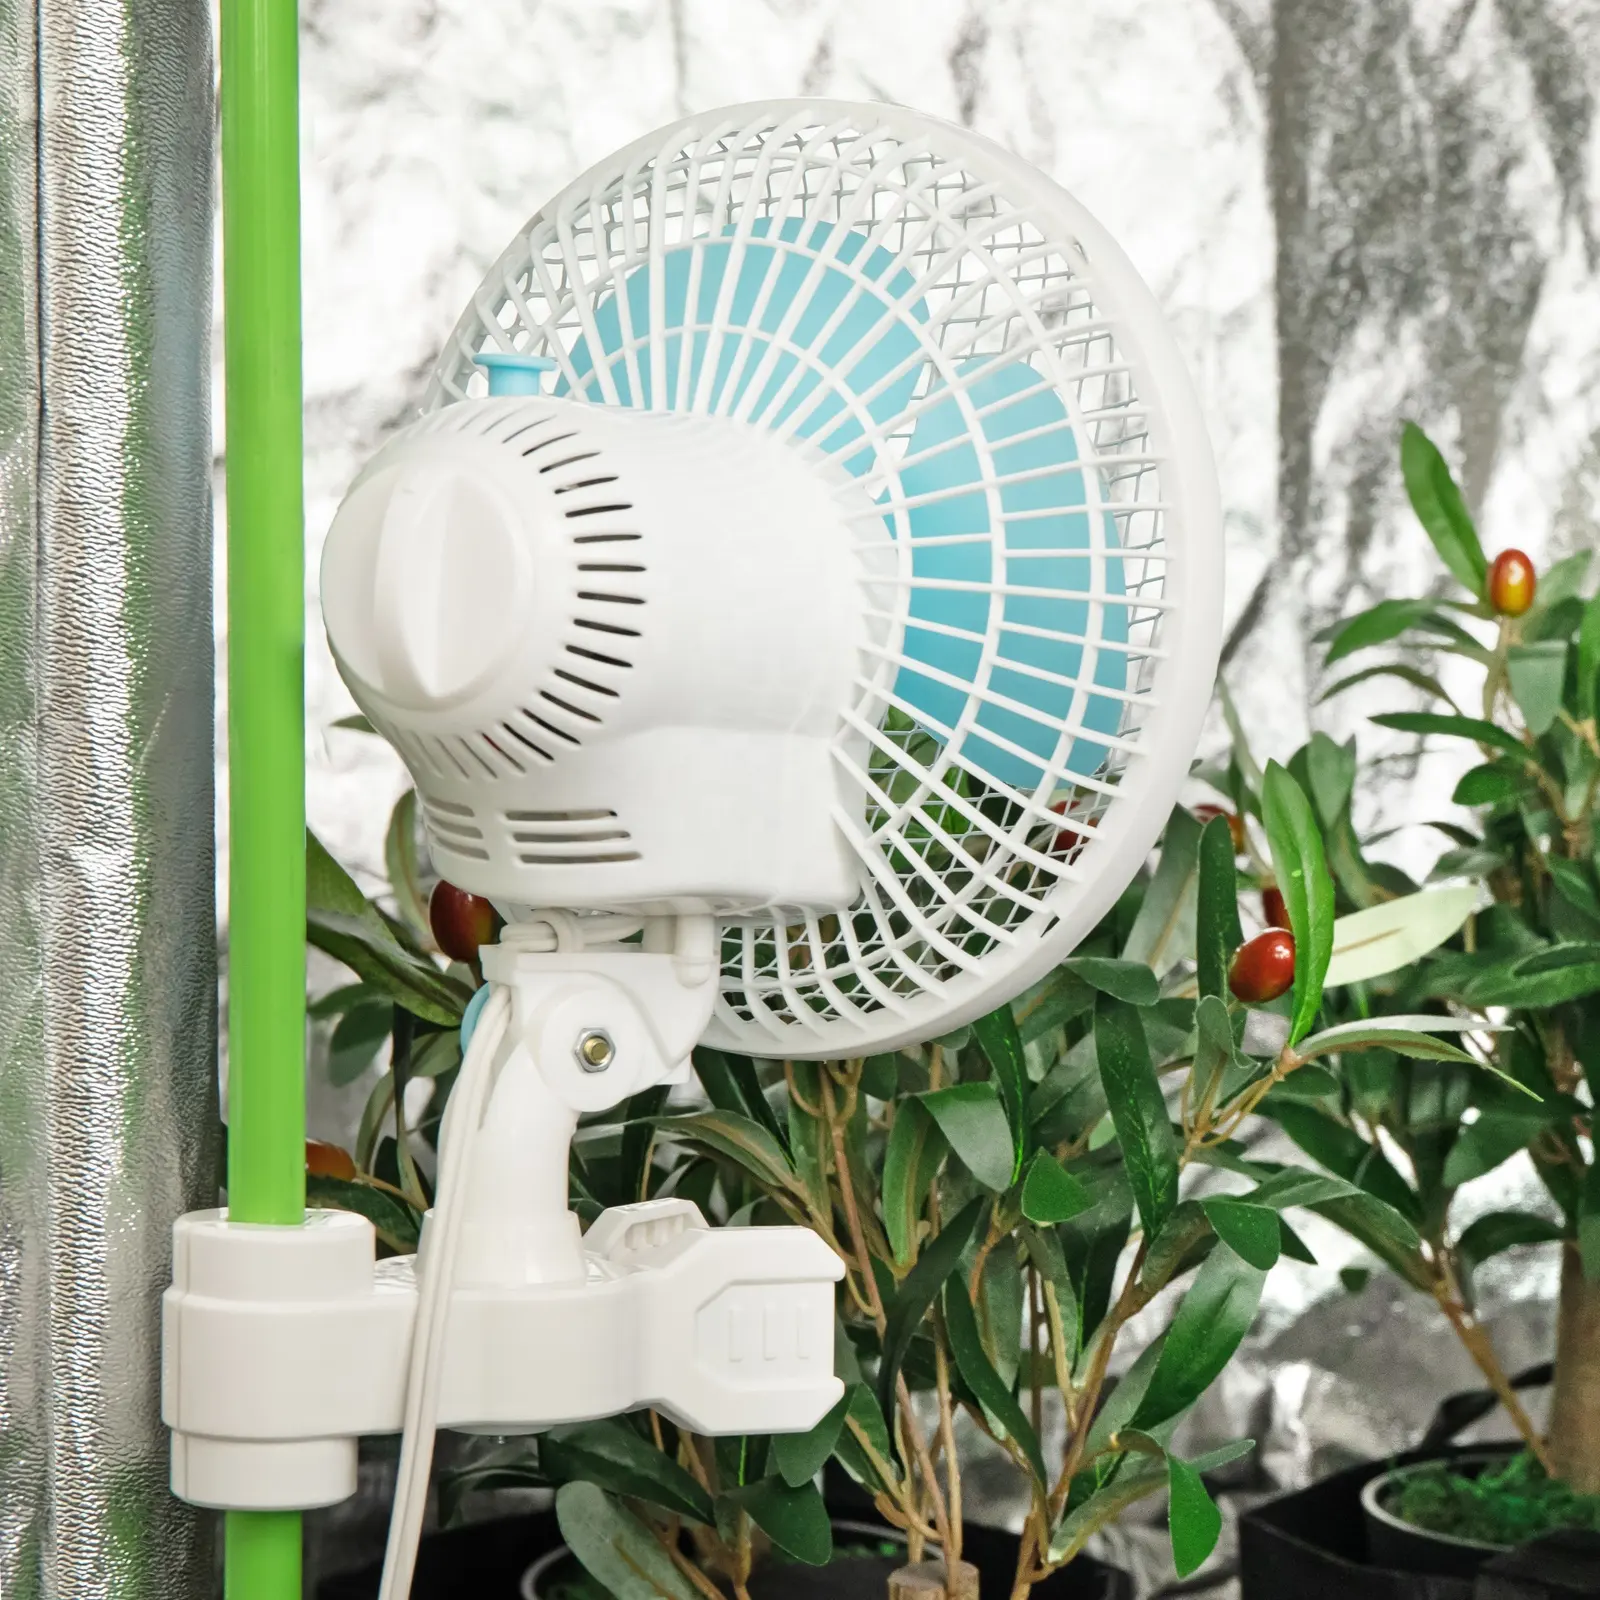 CE Certified 6 Inch Grip Oscillating Clip Fan for Indoor Gardening and Hydroponics with 1-year Warranty